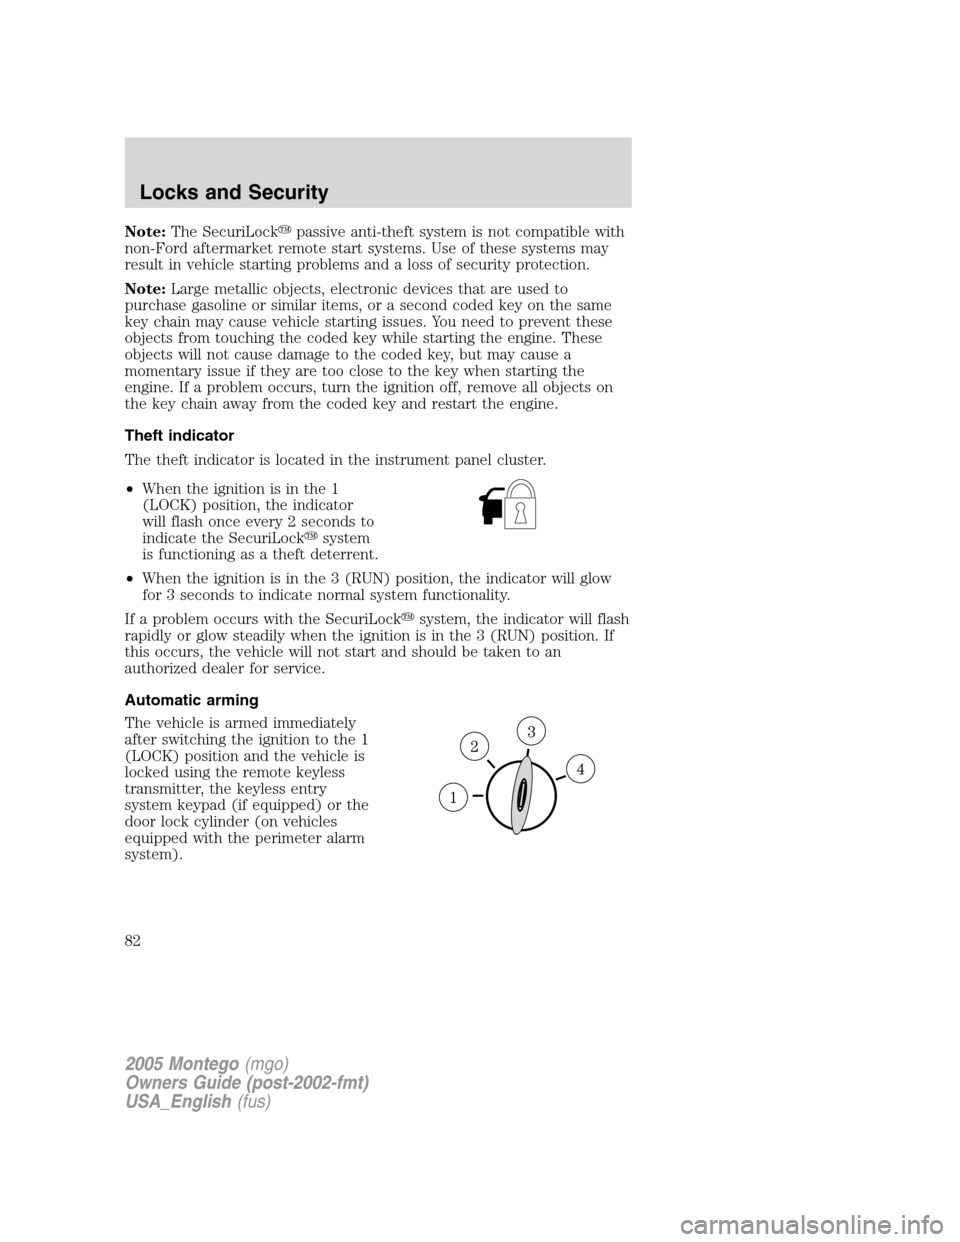 Mercury Montego 2005  Owners Manuals Note:The SecuriLockpassive anti-theft system is not compatible with
non-Ford aftermarket remote start systems. Use of these systems may
result in vehicle starting problems and a loss of security prot